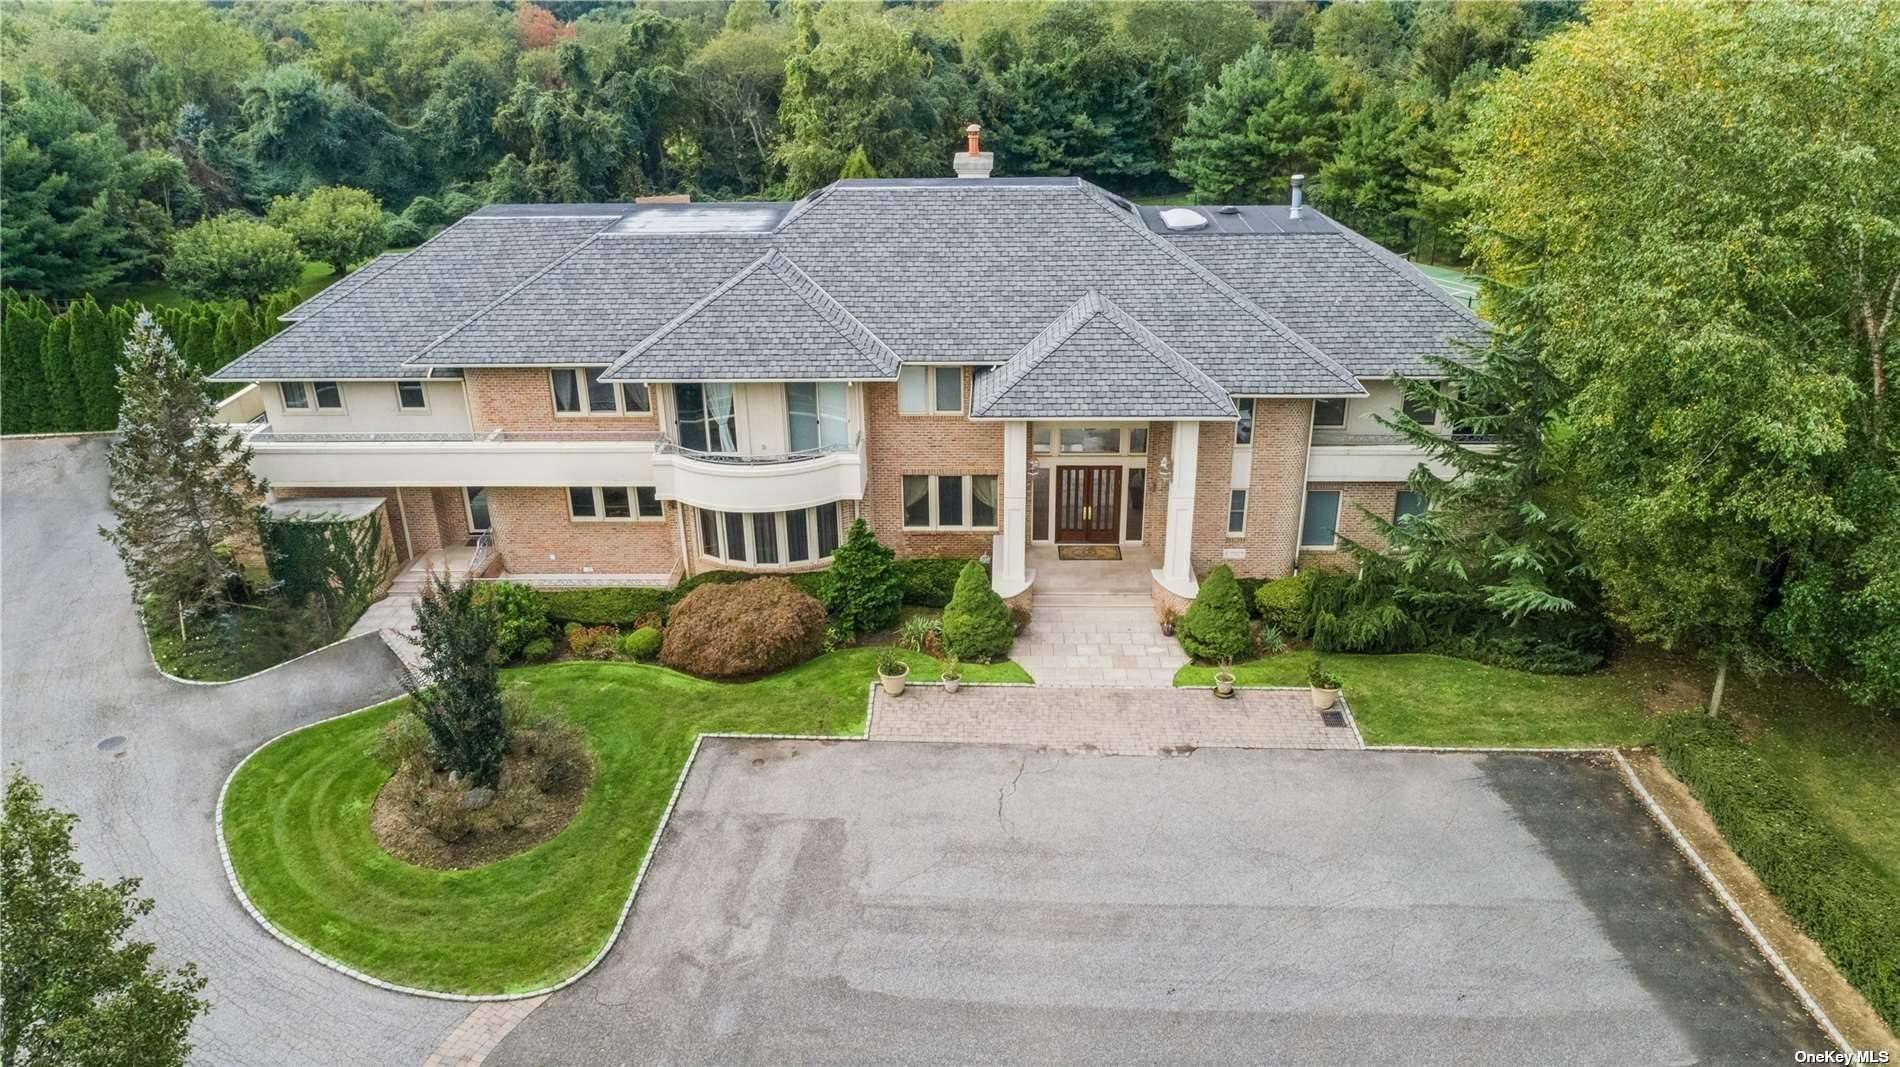 Welcome to this luxurious 10, 000 sq ft custom, brick colonial nestled on over four acres of beautifully landscaped property on the Gold Coast of Long Island.